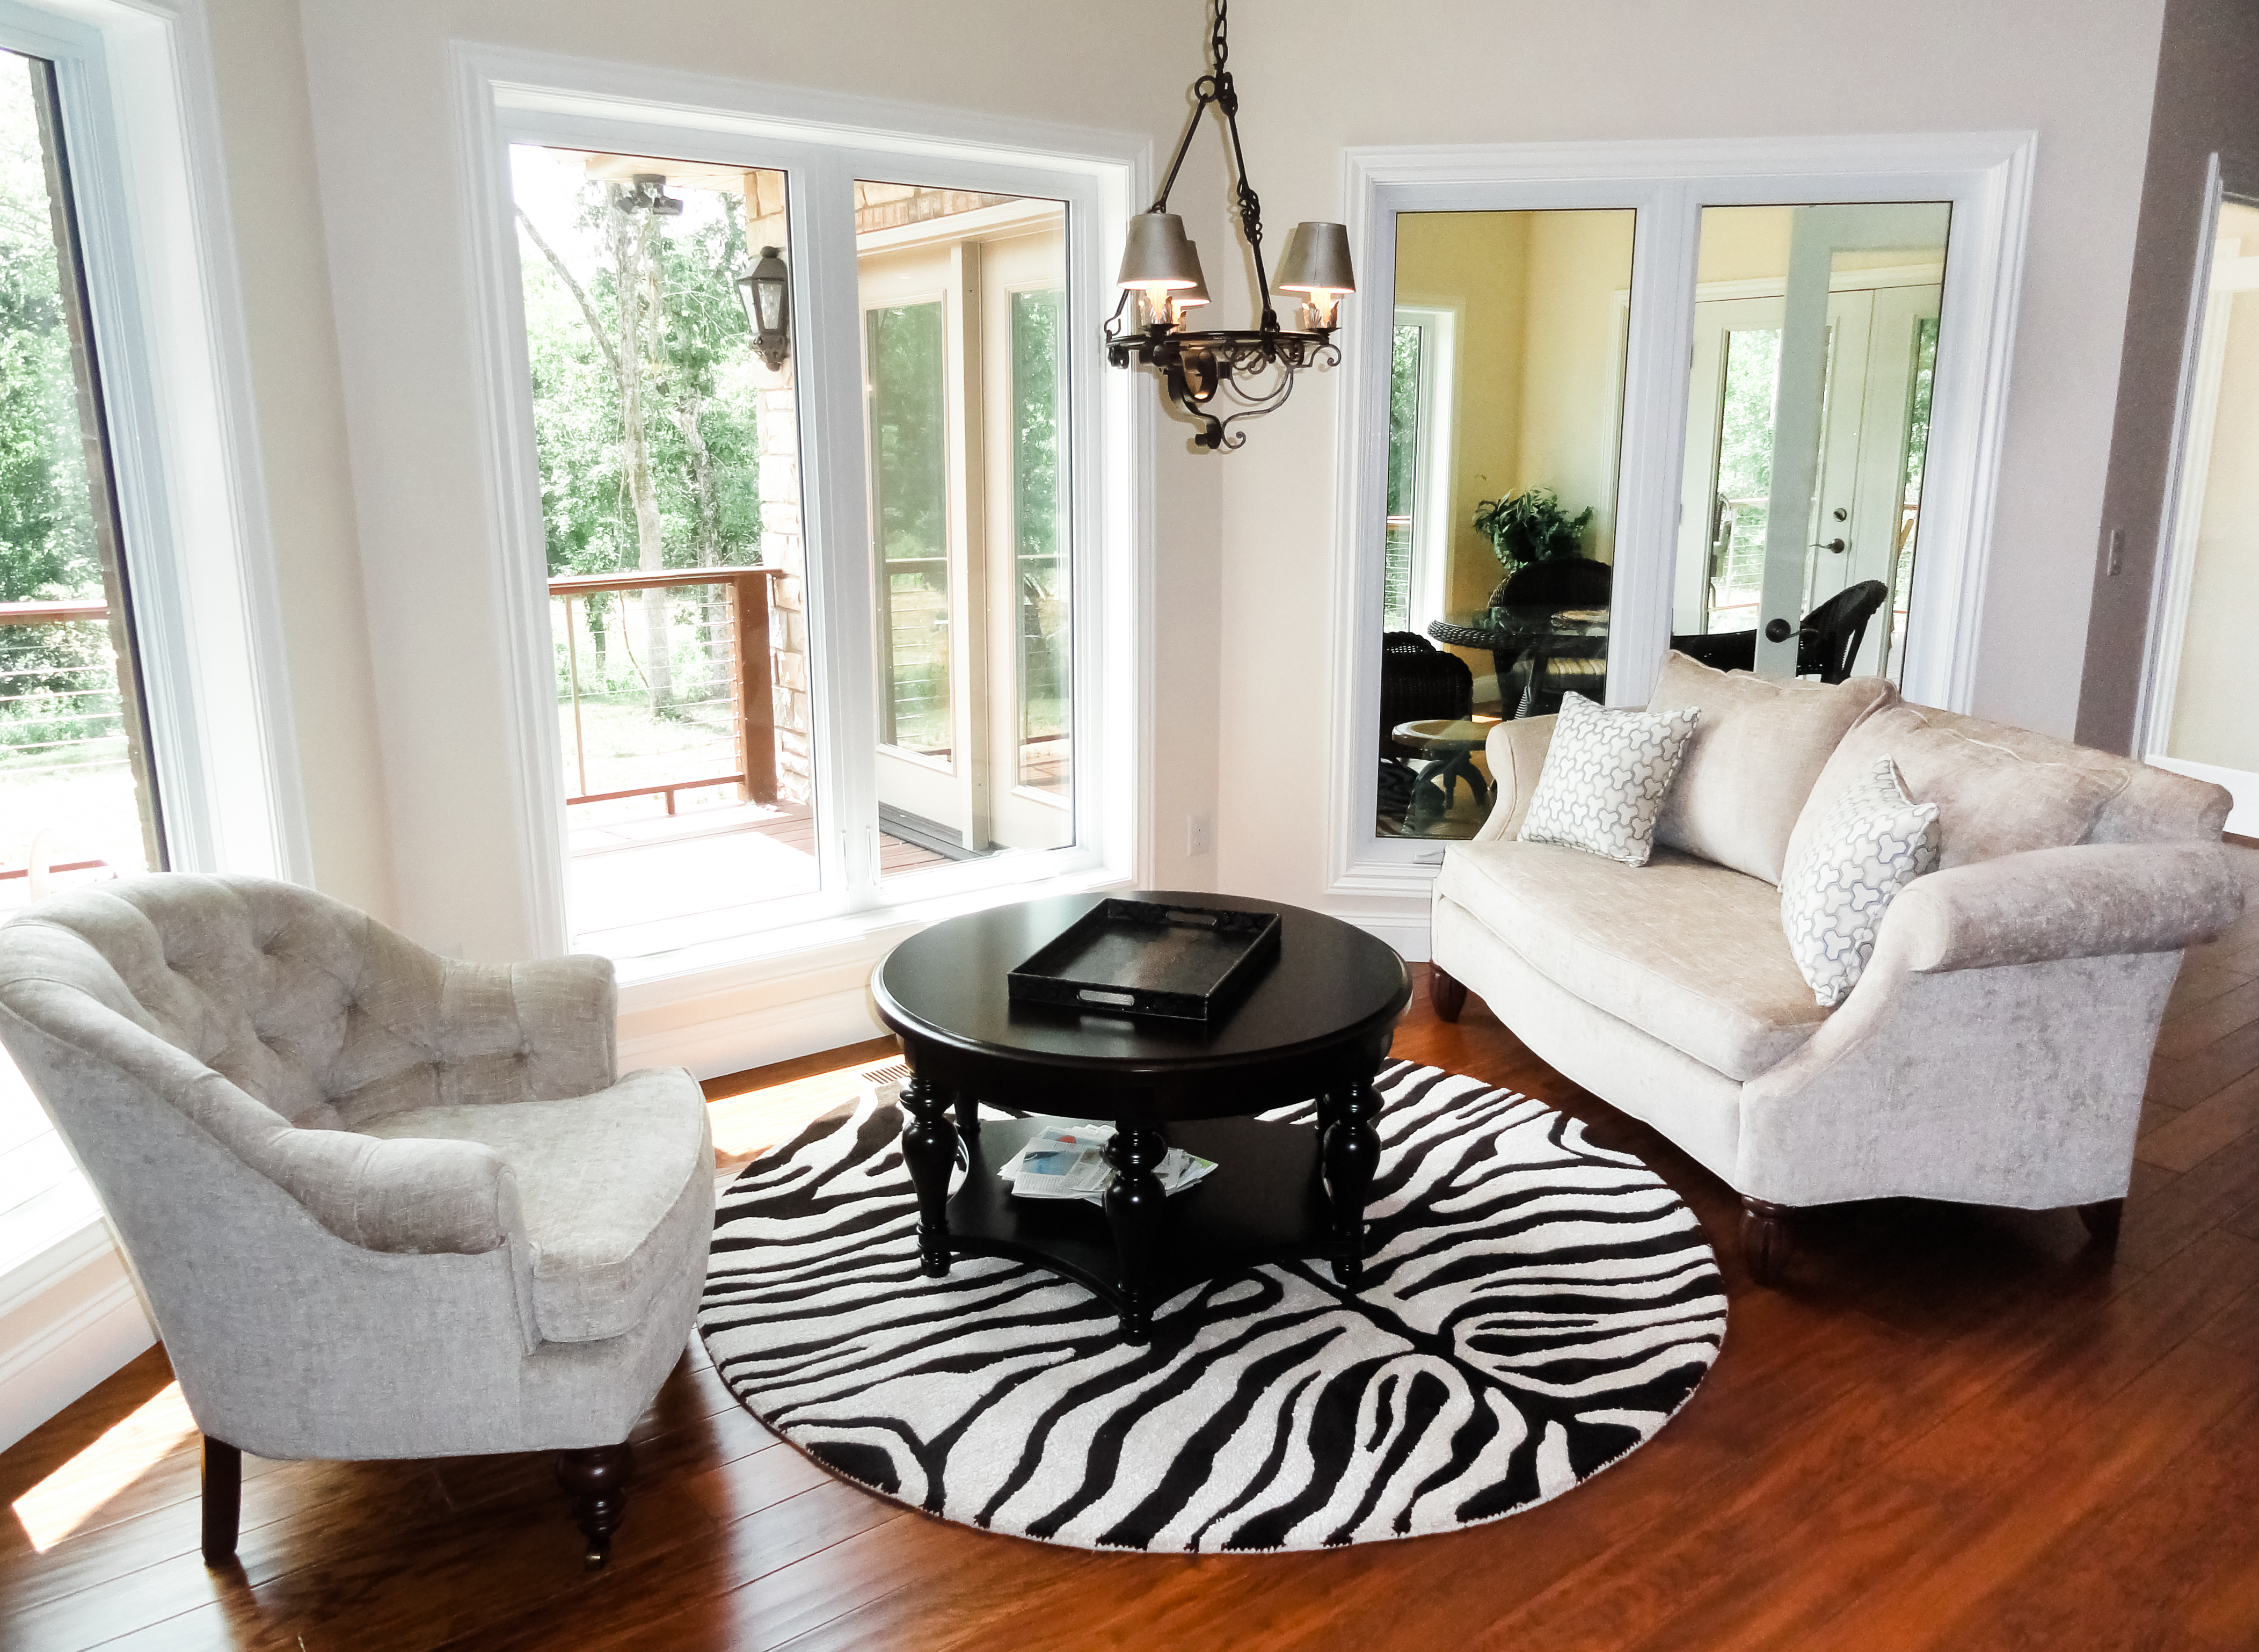 zebra round rug, ivory arm chair, ivory couch, black round coffee table, black serving tray, large windows, wood floors